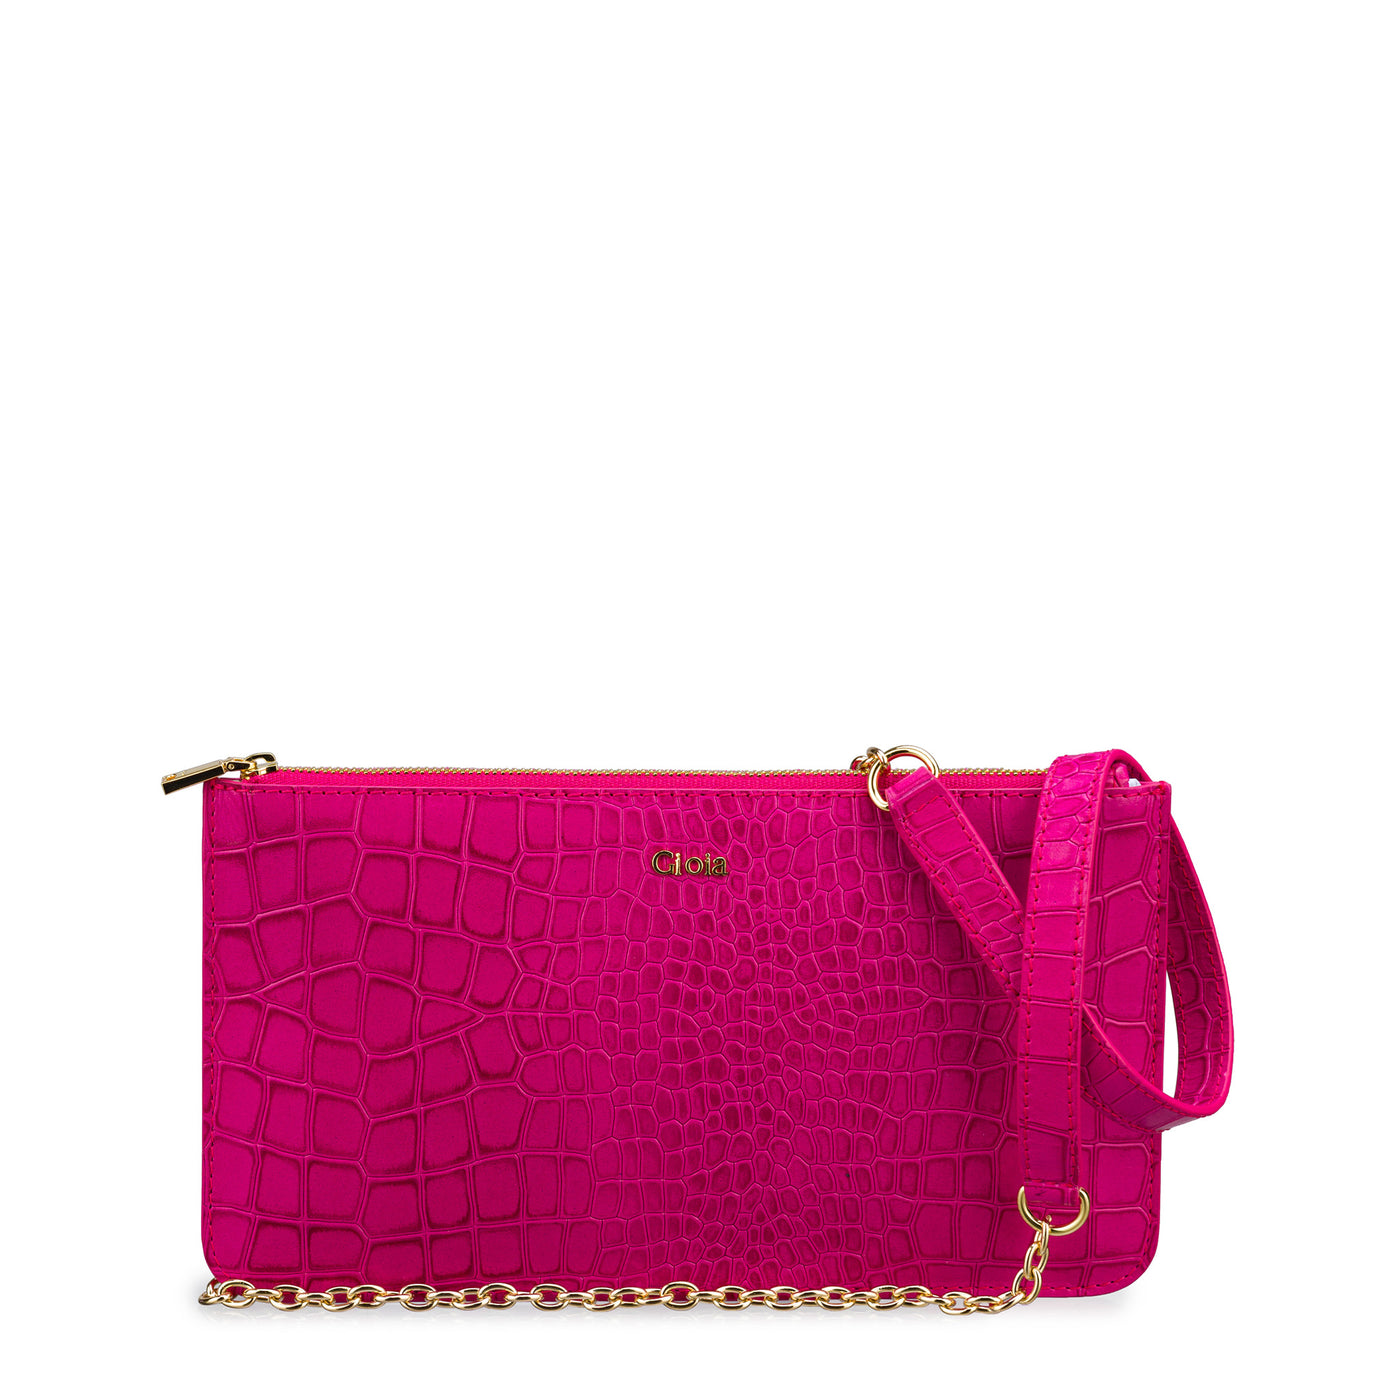 Pink evening clutch bags for weddings